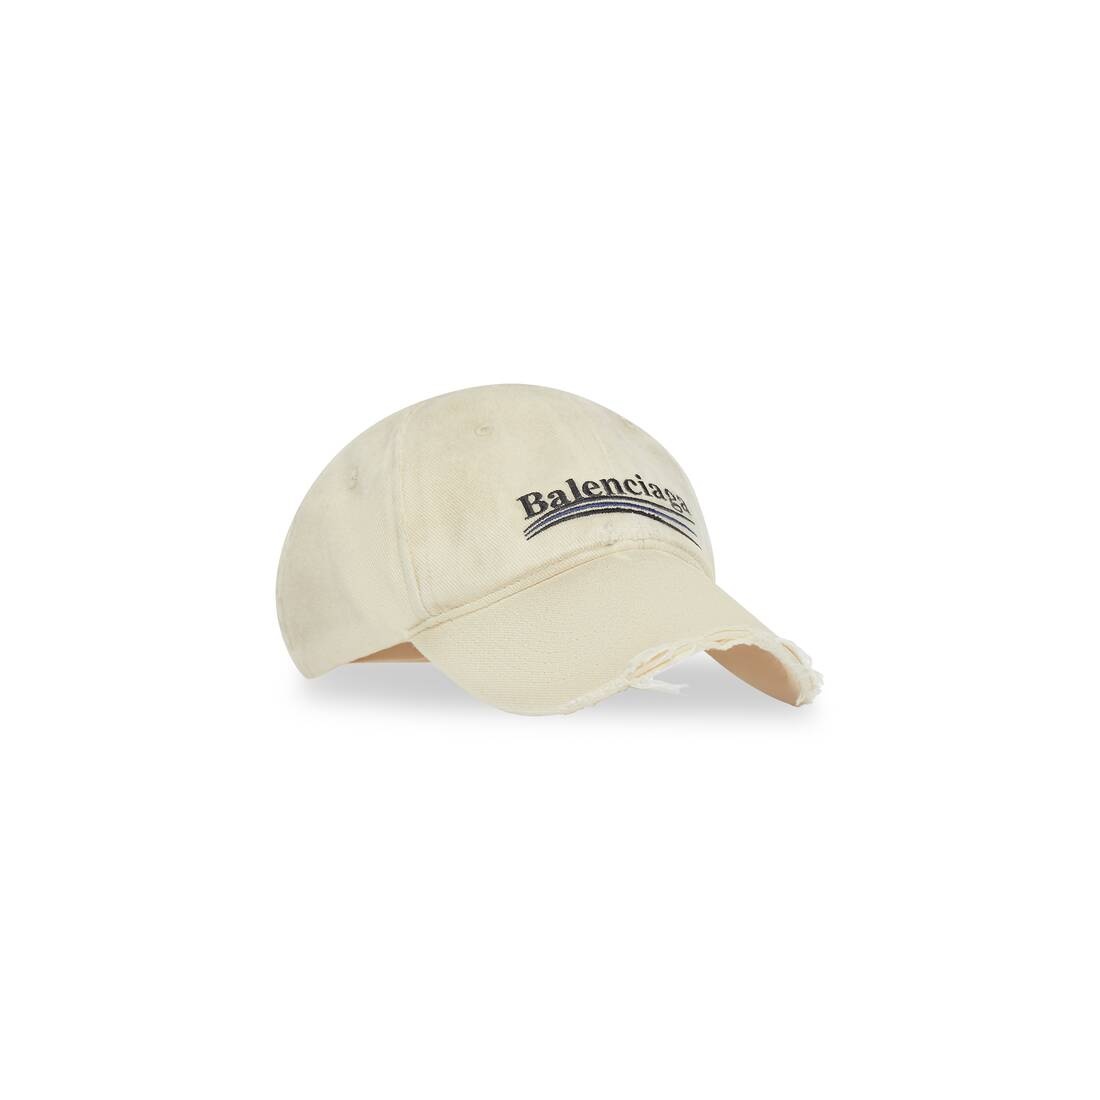 Women's Political Campaign Destroyed Cap in Beige - 2